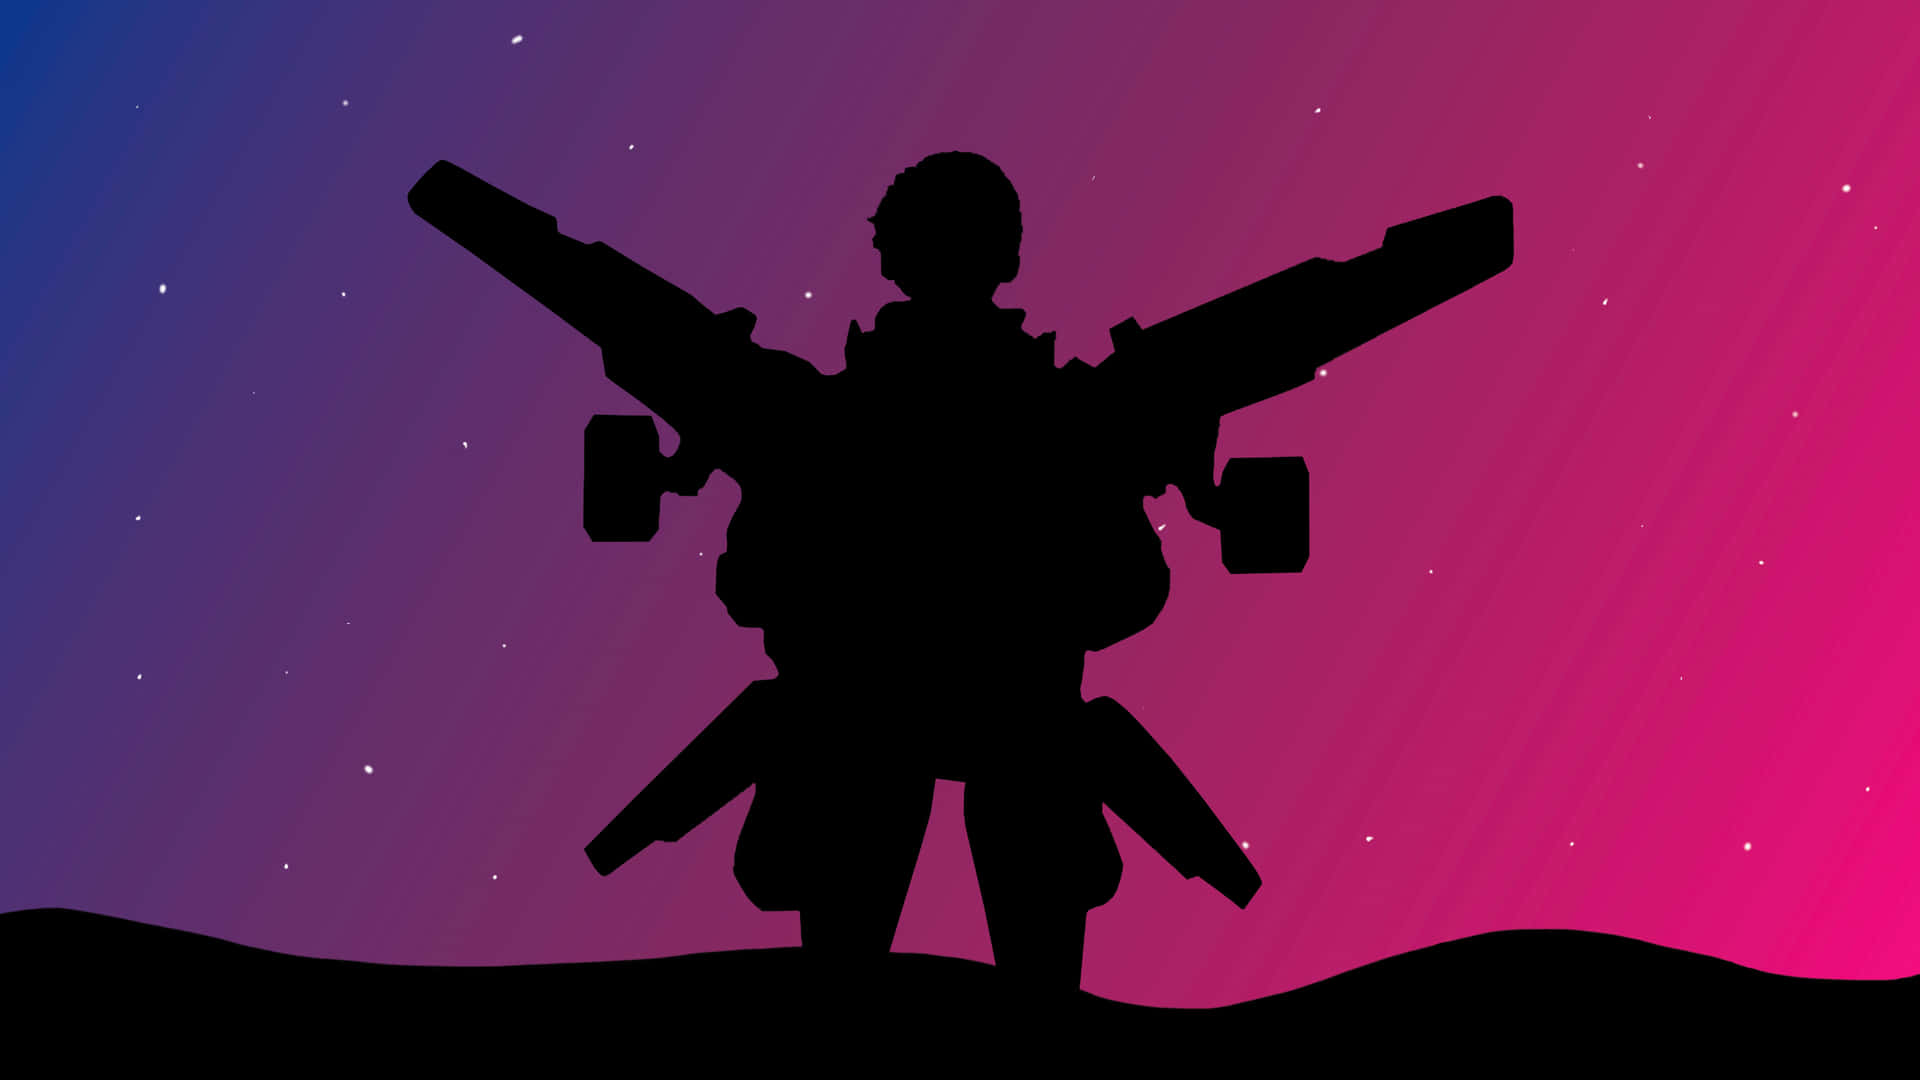 Valkyrie Apex Legends Purple And Pink Aesthetic Wallpaper